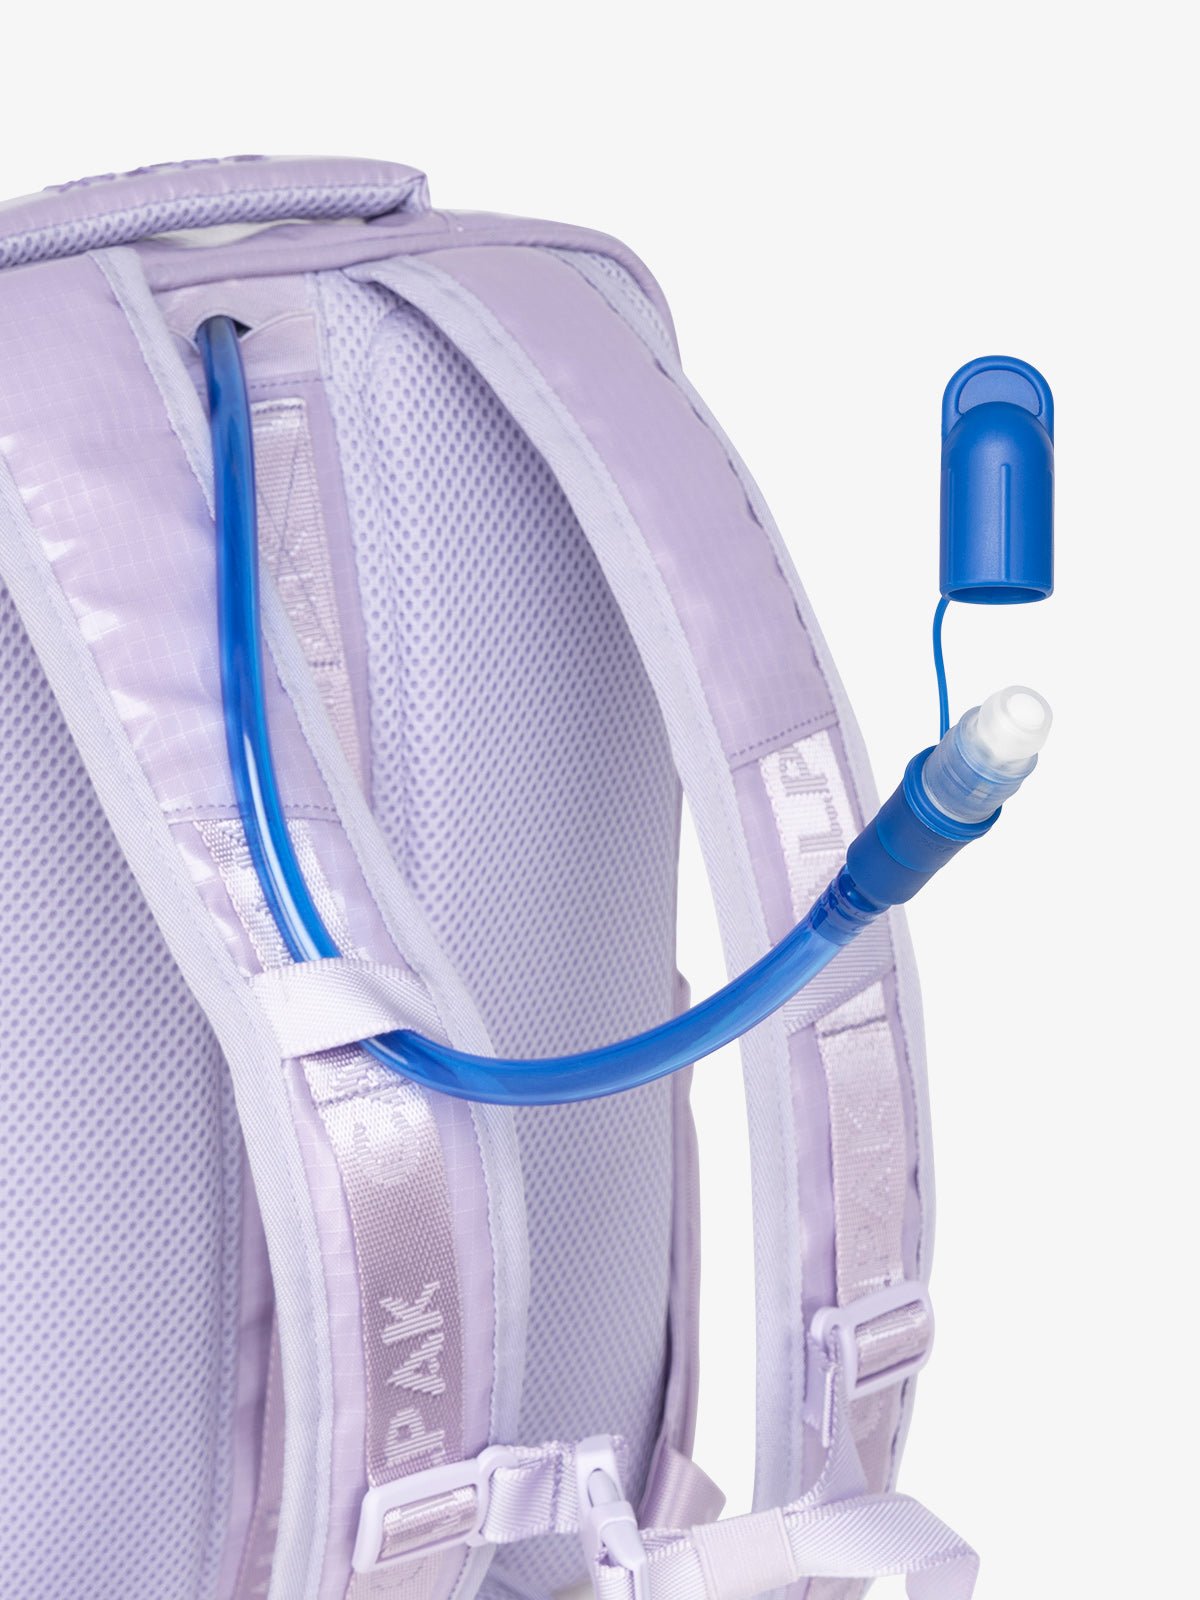 Close up of removable hydration reservoir straw with valve cap in amethyst